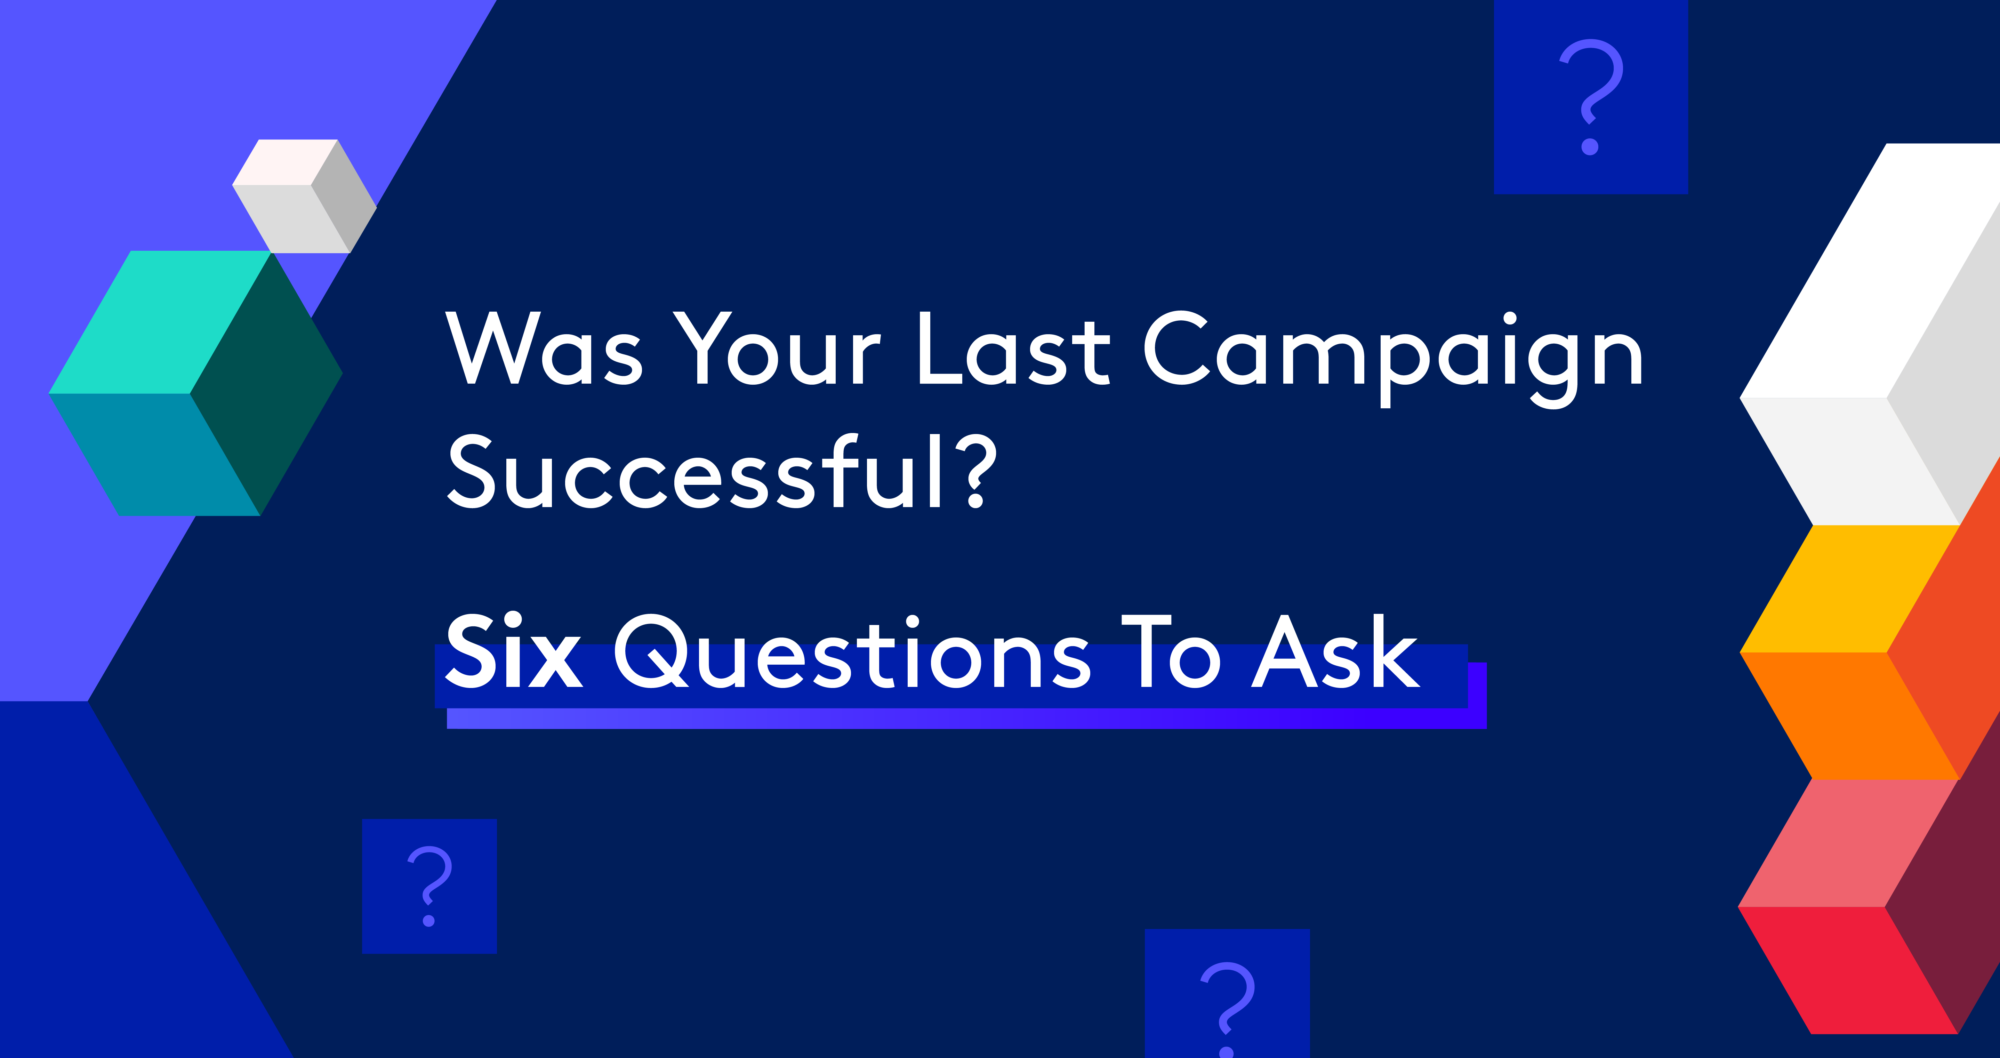 Title image on a dark blue background with block shapes with the title text in the middle stating "Was Your Last Campaign Successful? Six Questions To Ask".